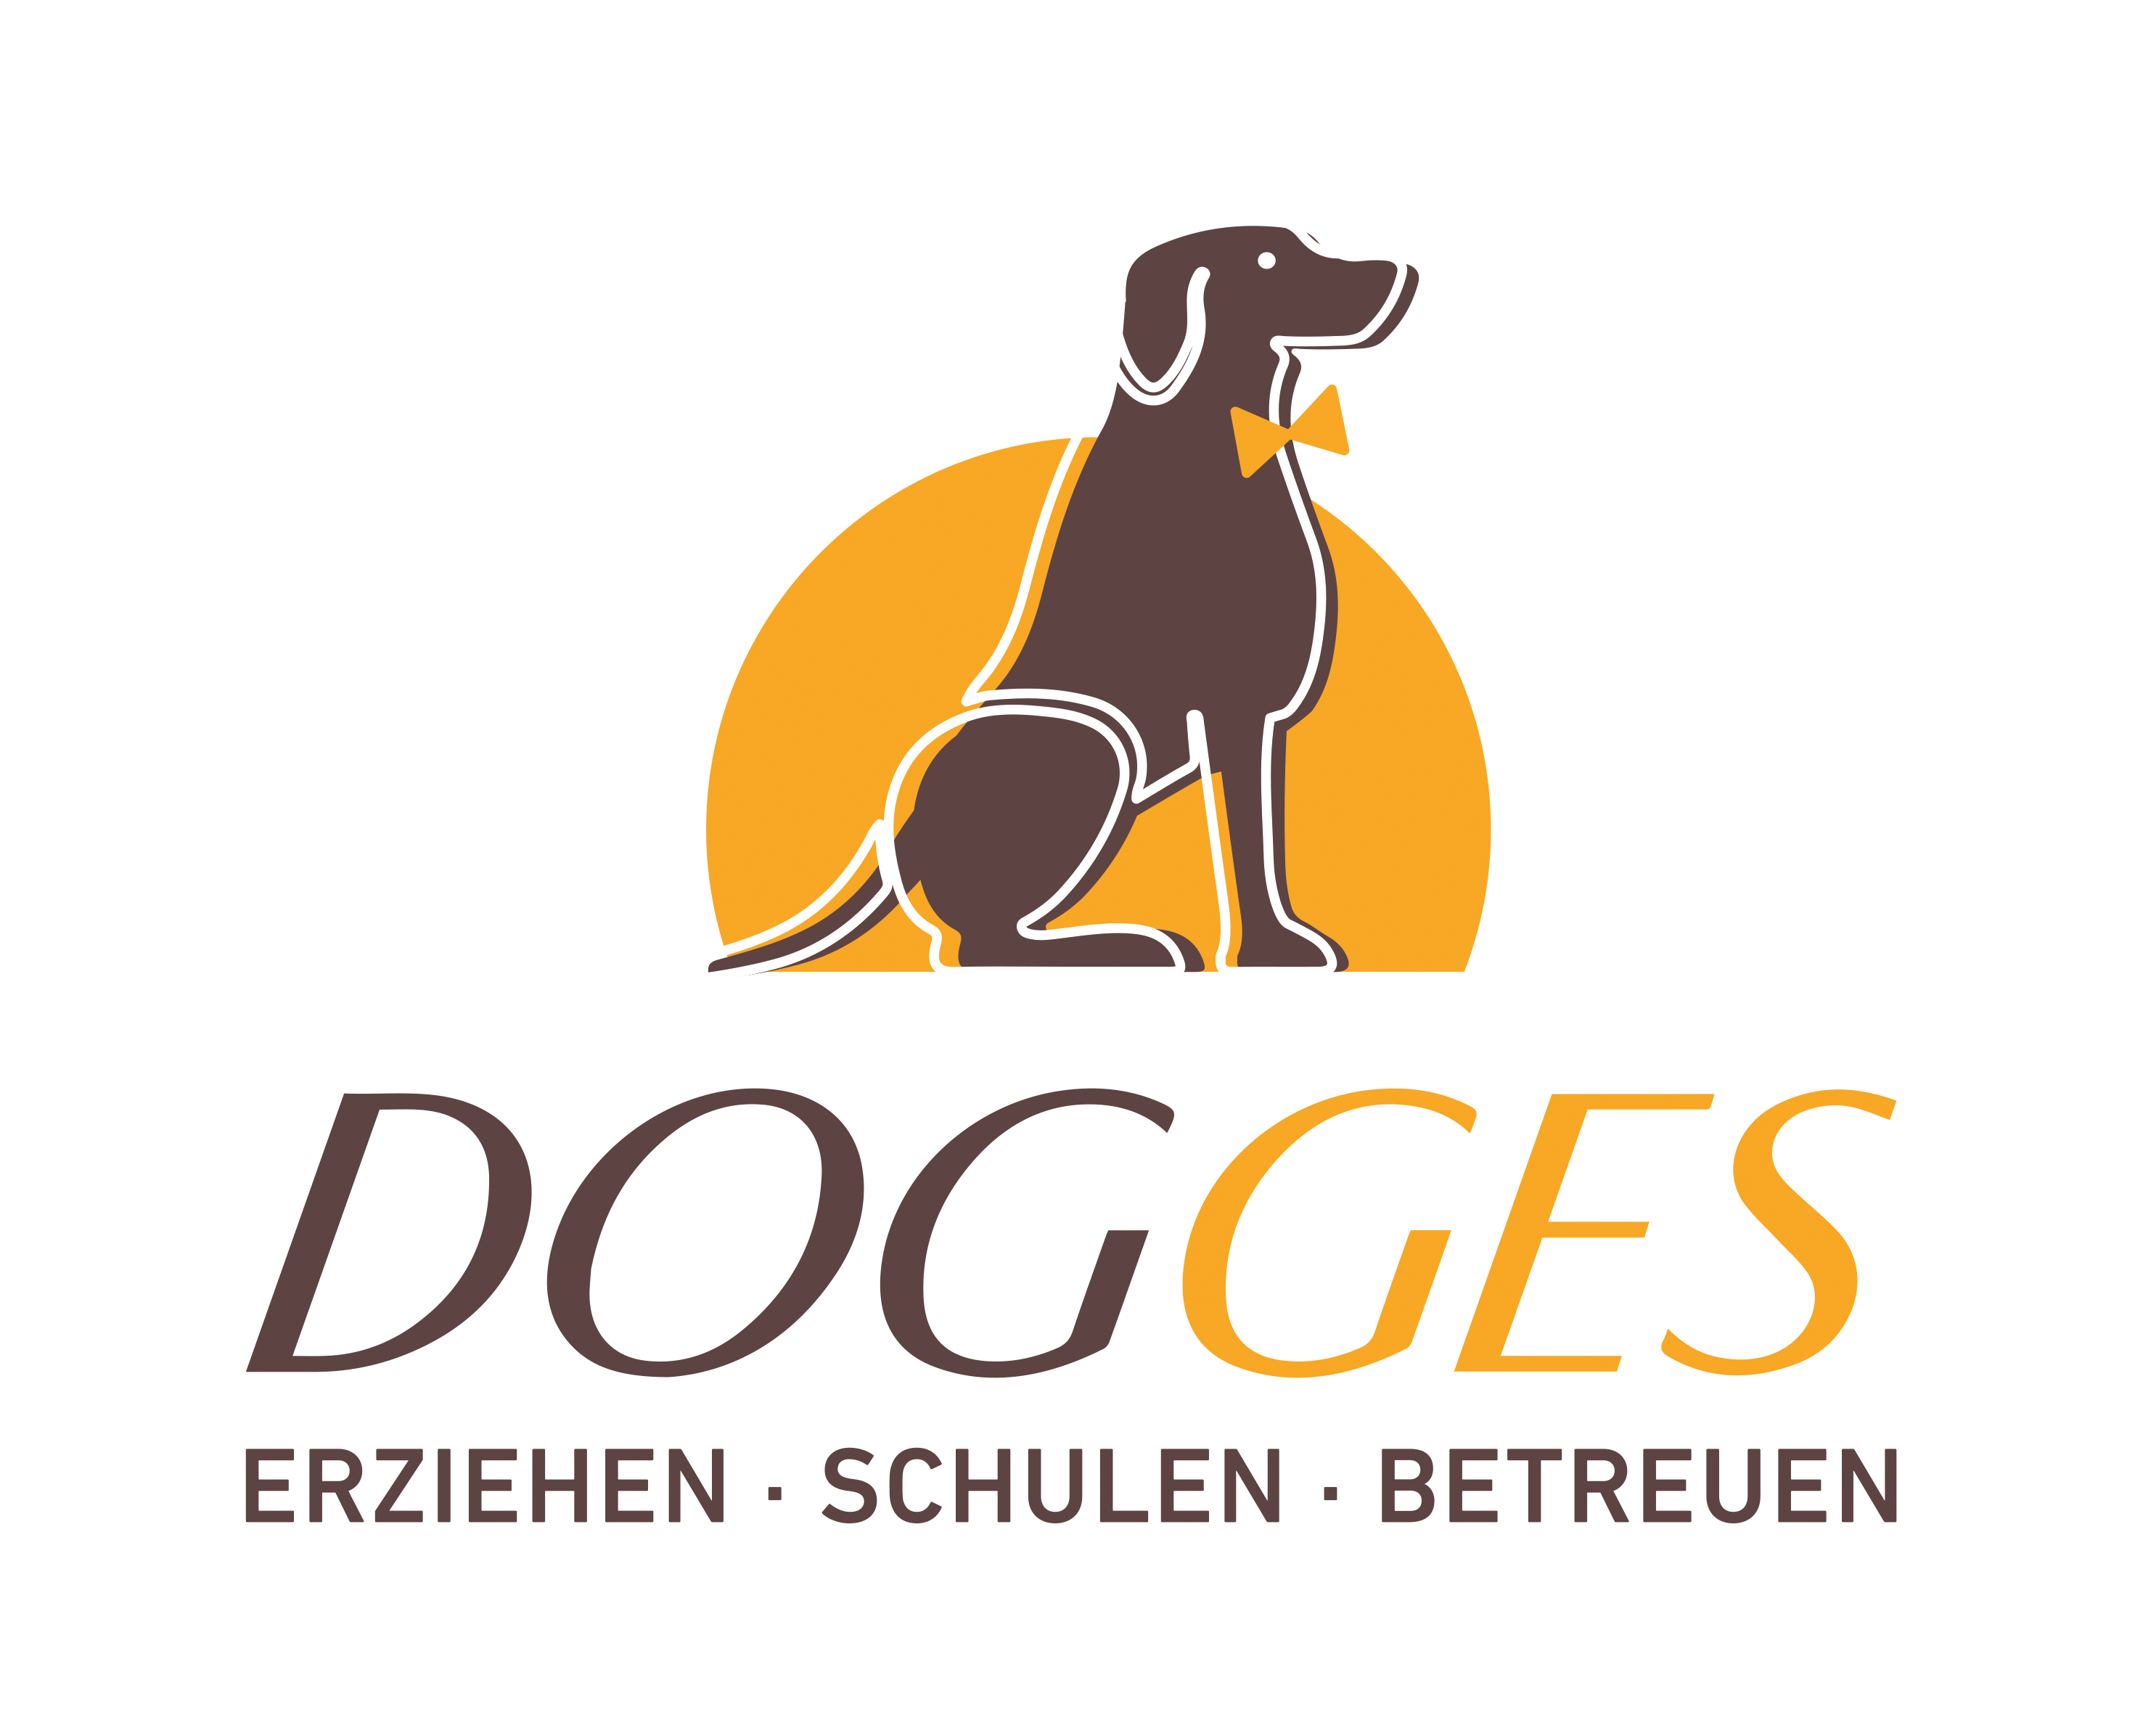 Dogges